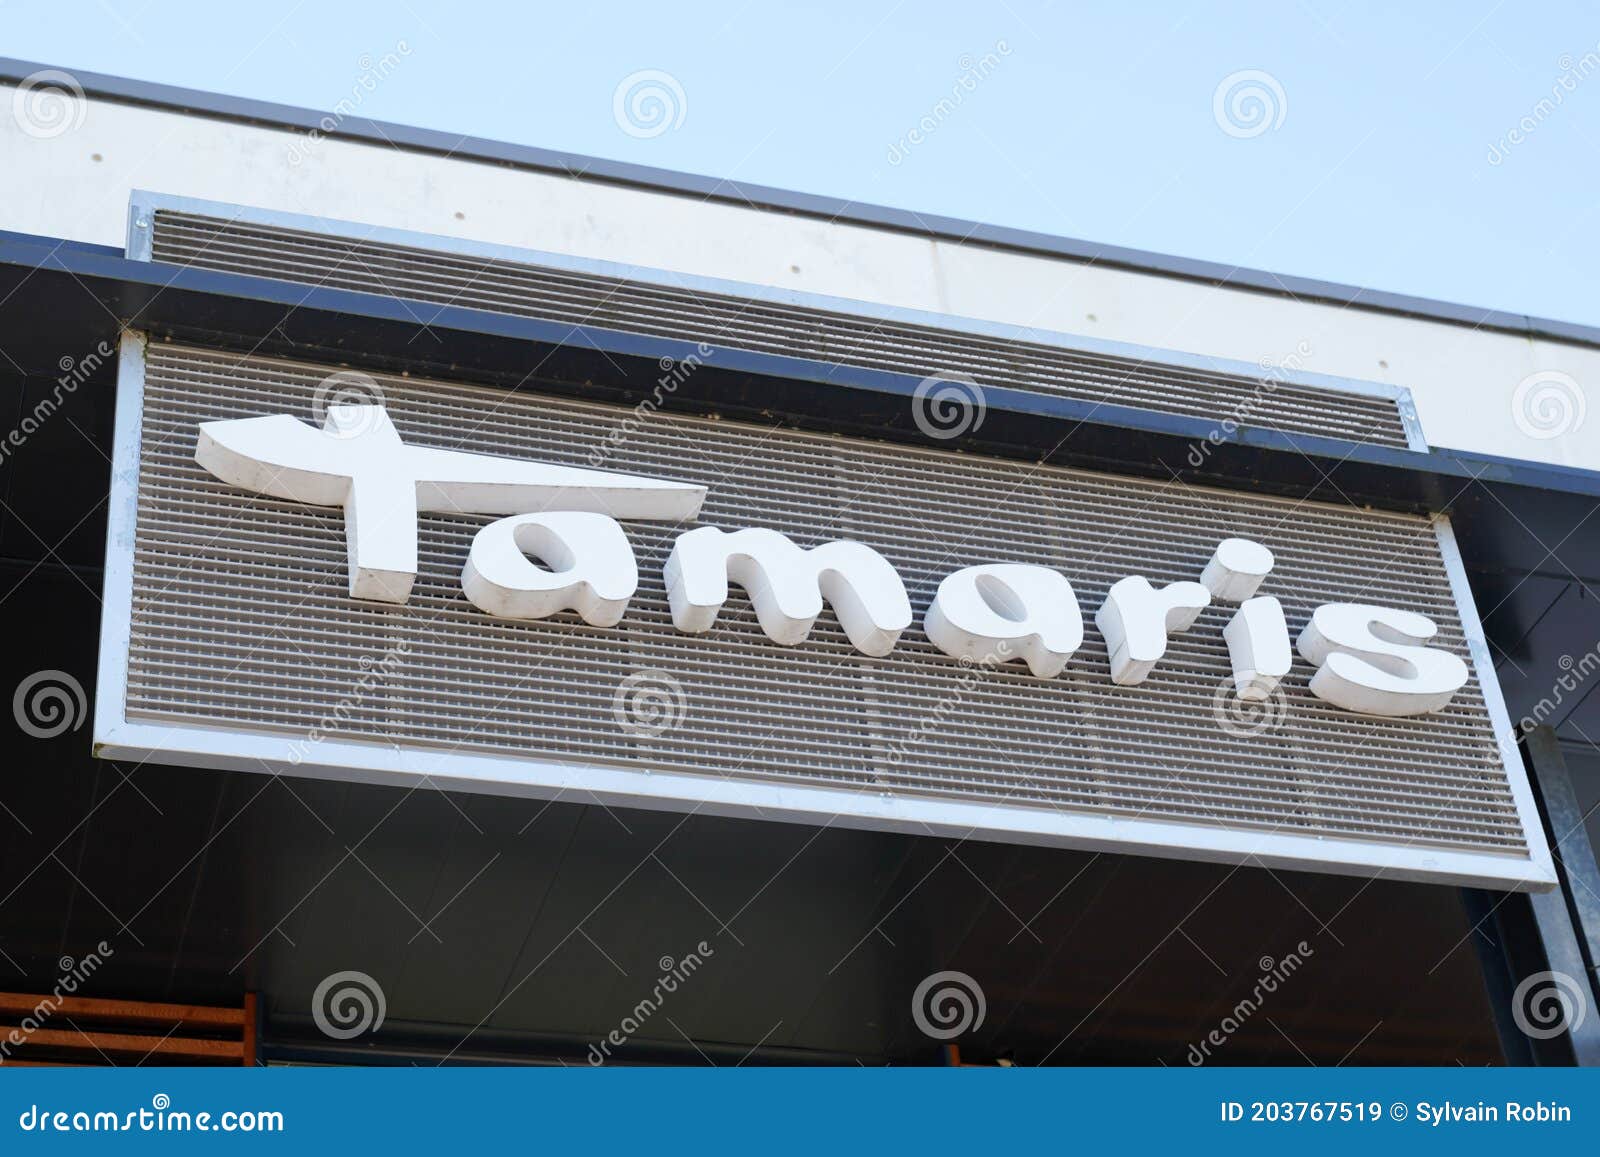 undskylde køber Interaktion Tamaris Sign Text and Logo of Shoe Footwear Store of German Company  Provides Shoes Editorial Stock Image - Image of consumers, exterior:  203767519